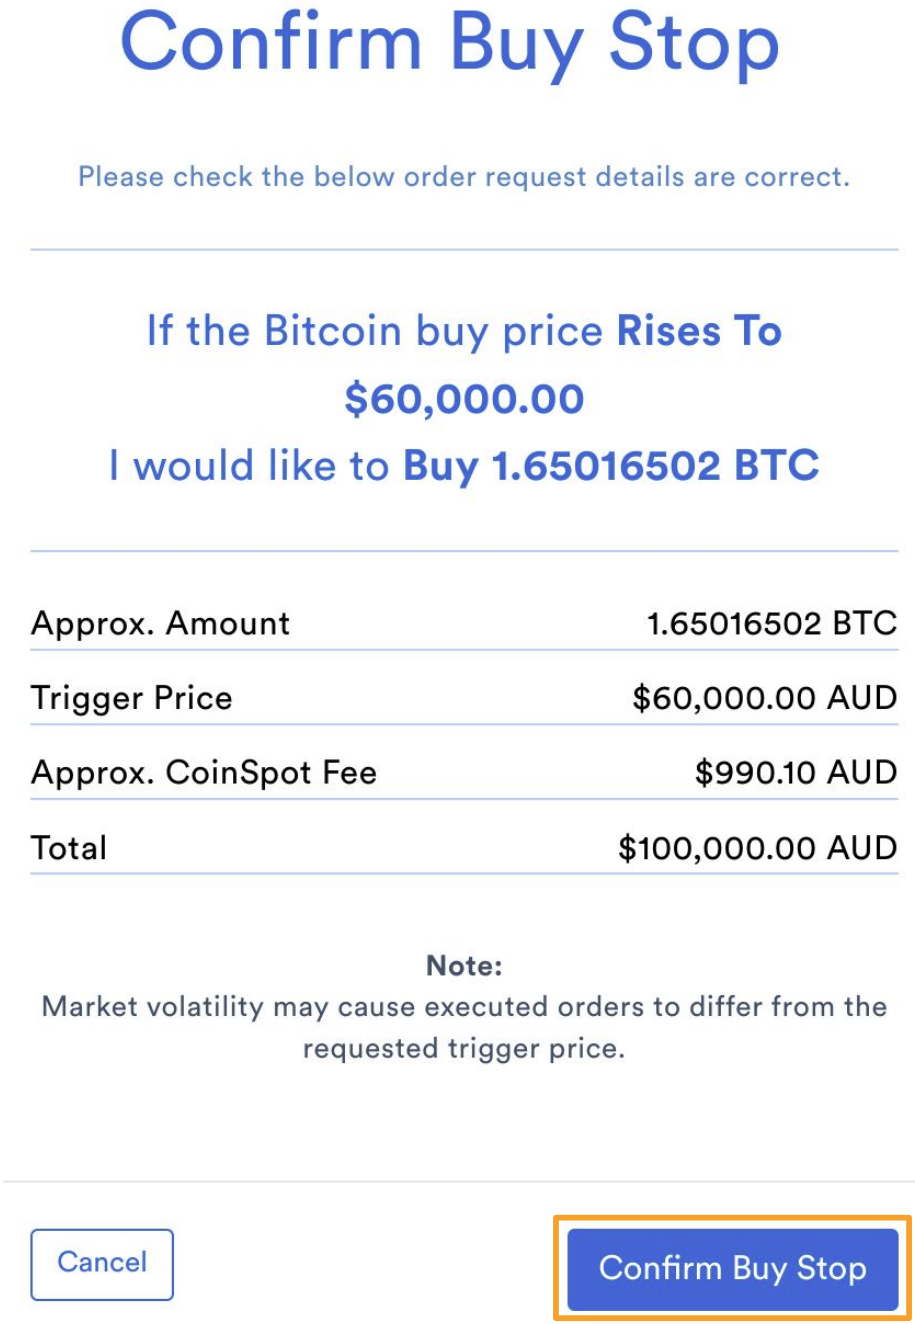 CoinSpot_Buy_Stop_Confirmation_Page.png